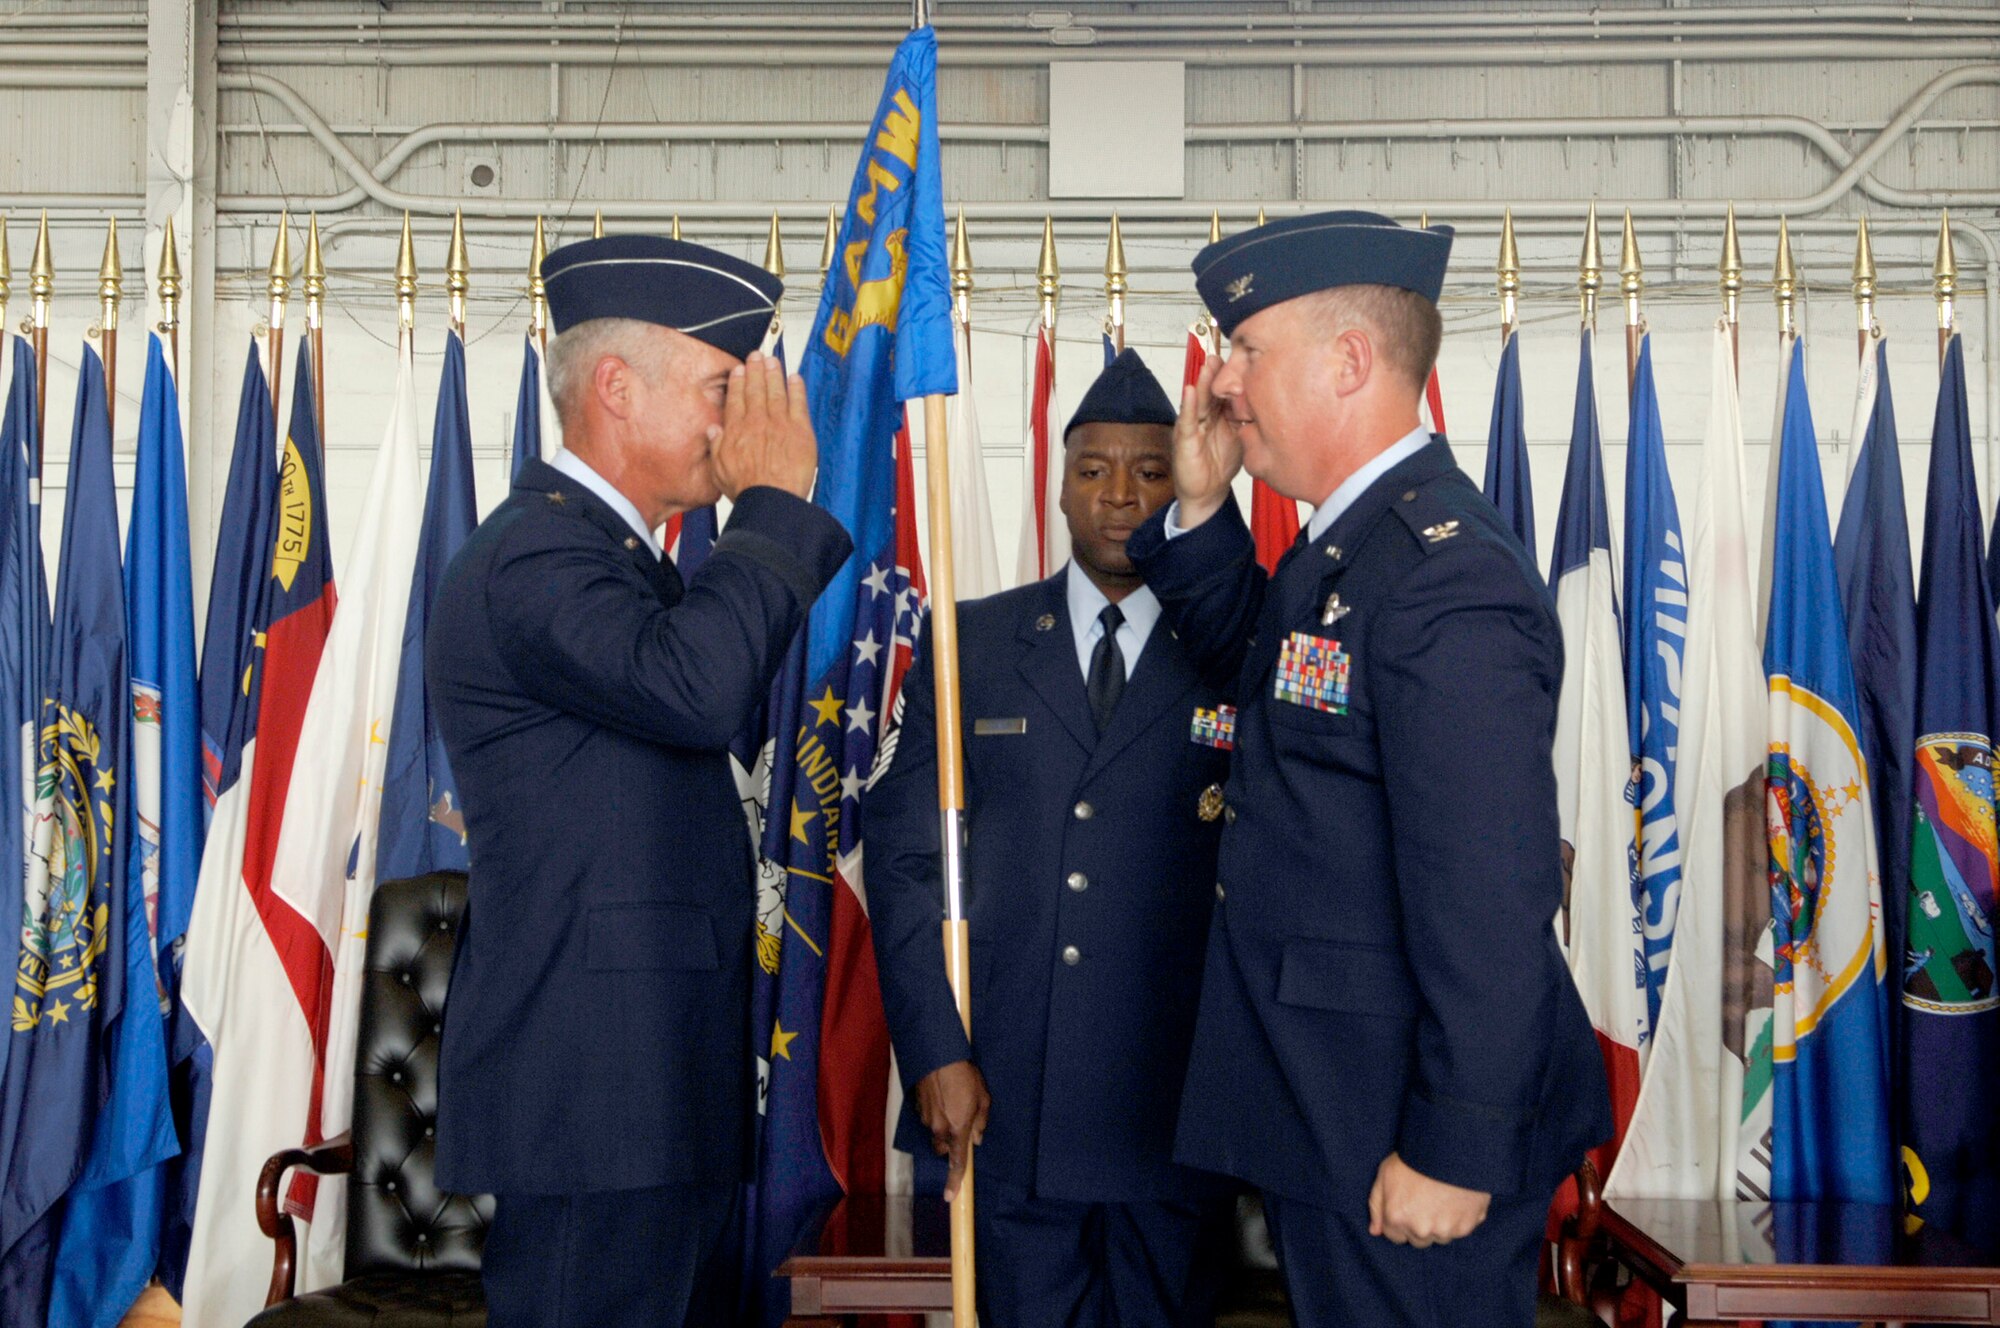 Col. Lawrence Martin takes command of the 6th Air Mobility Wing during the wing's change of command ceremony Monday. Col. Martin comes to MacDill from an assignment as the vice commander of the 379th Air Expeditionary Wing, Southwest Asia.  (U.S. Air Force photo by Staff Sgt. Joseph Swafford)